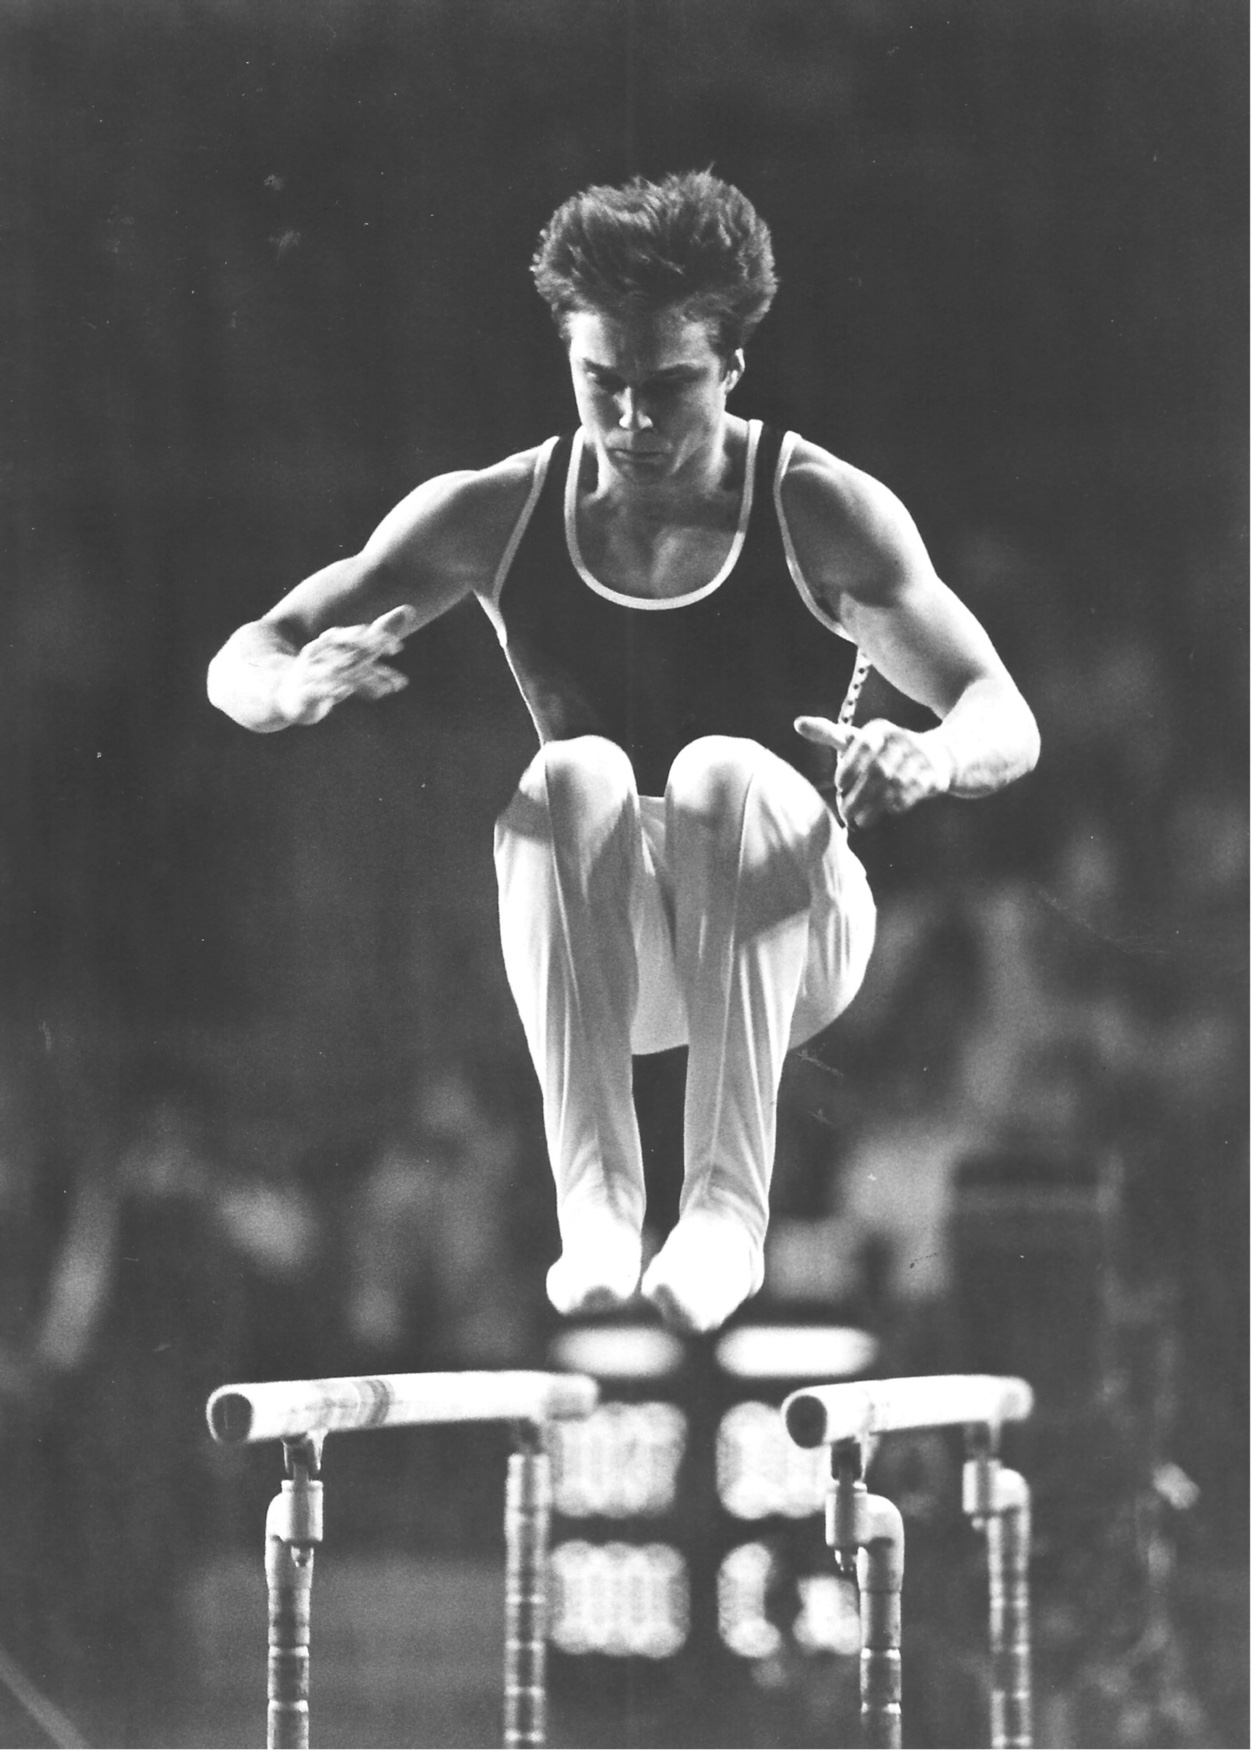 Keith Langley competing on Parallel Bars